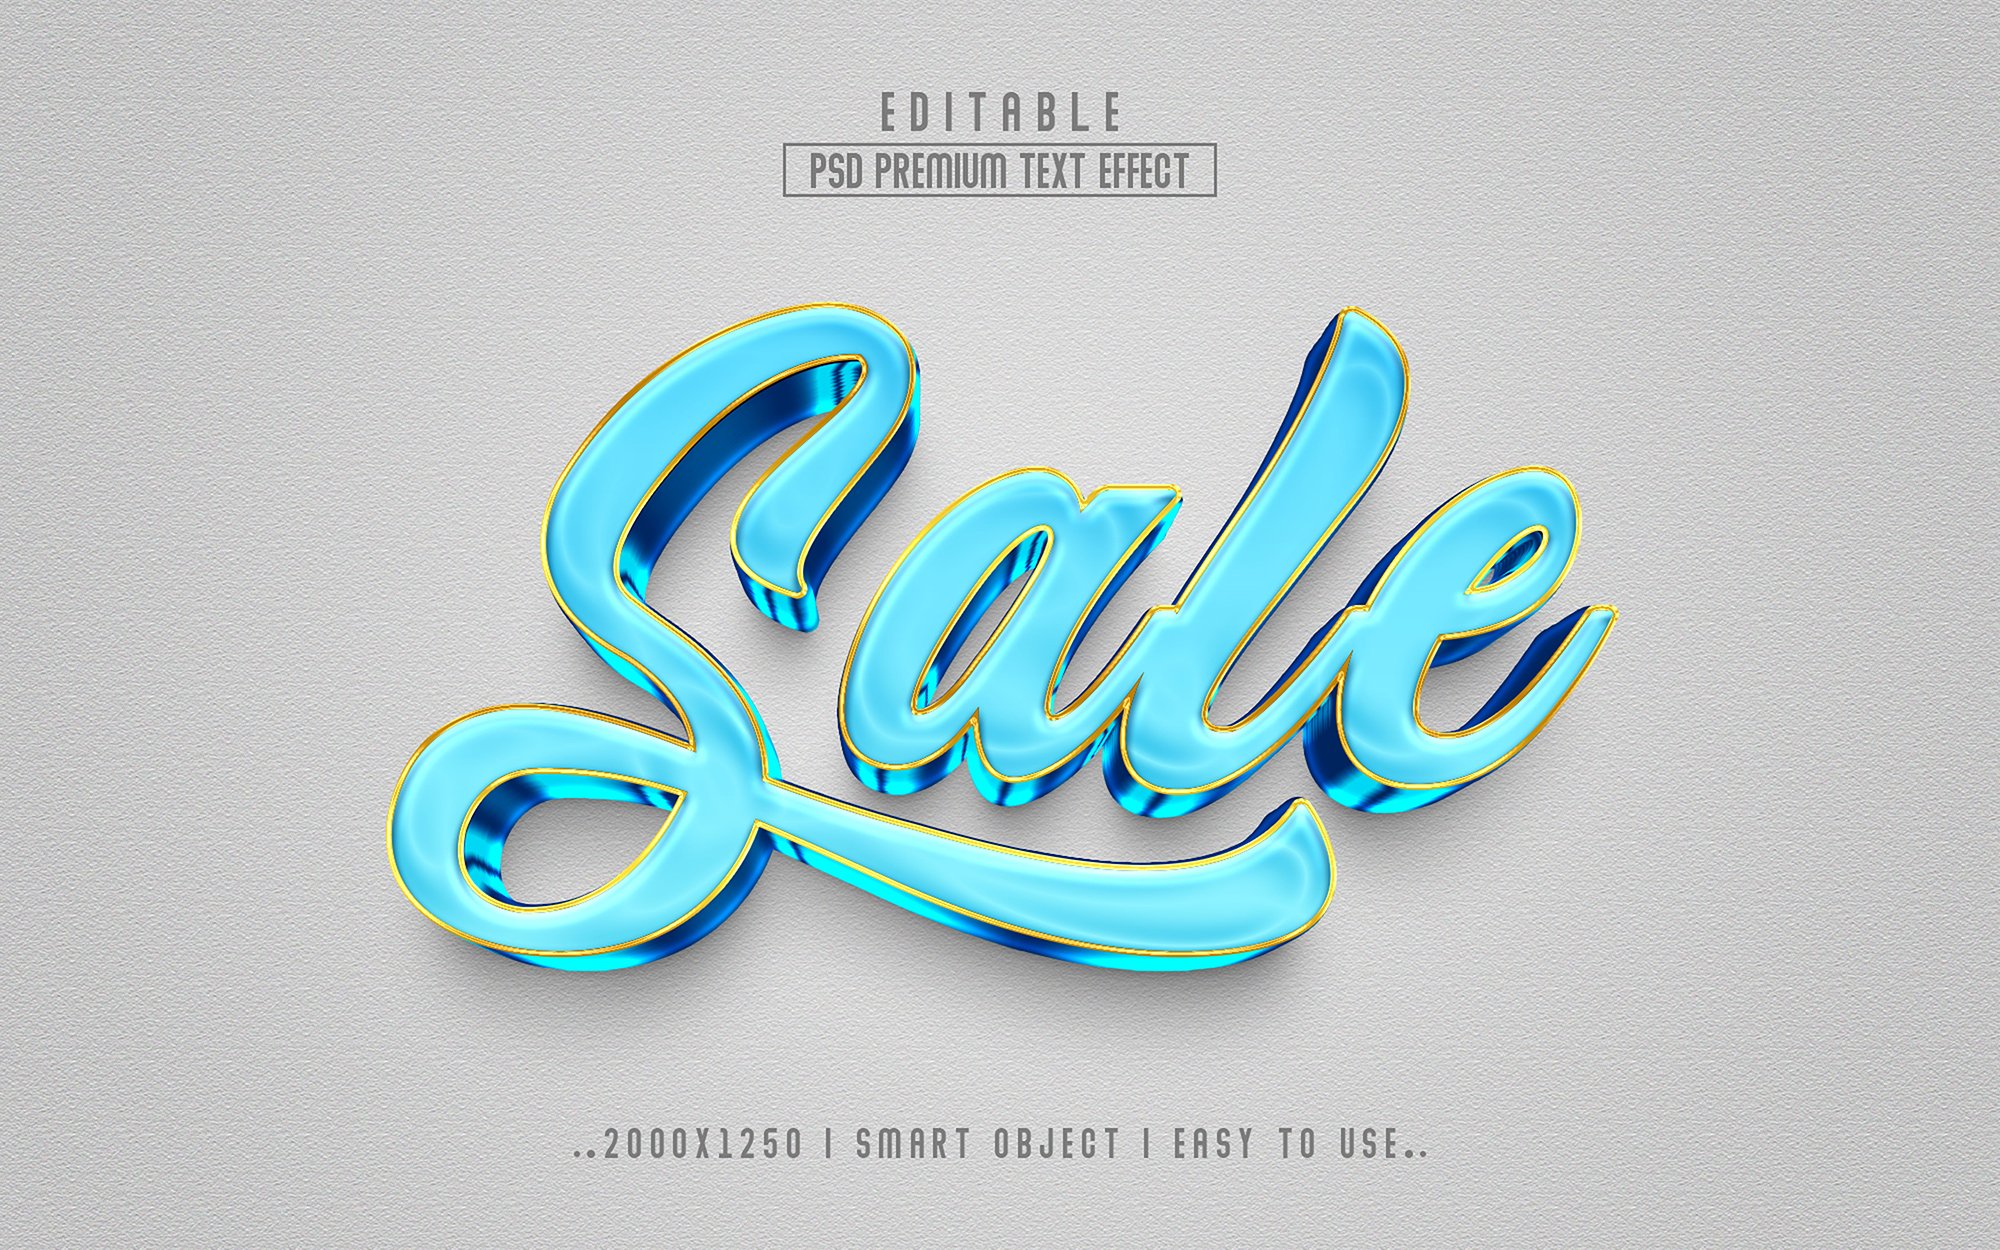 Sale 3D Editable Text Effect stylecover image.